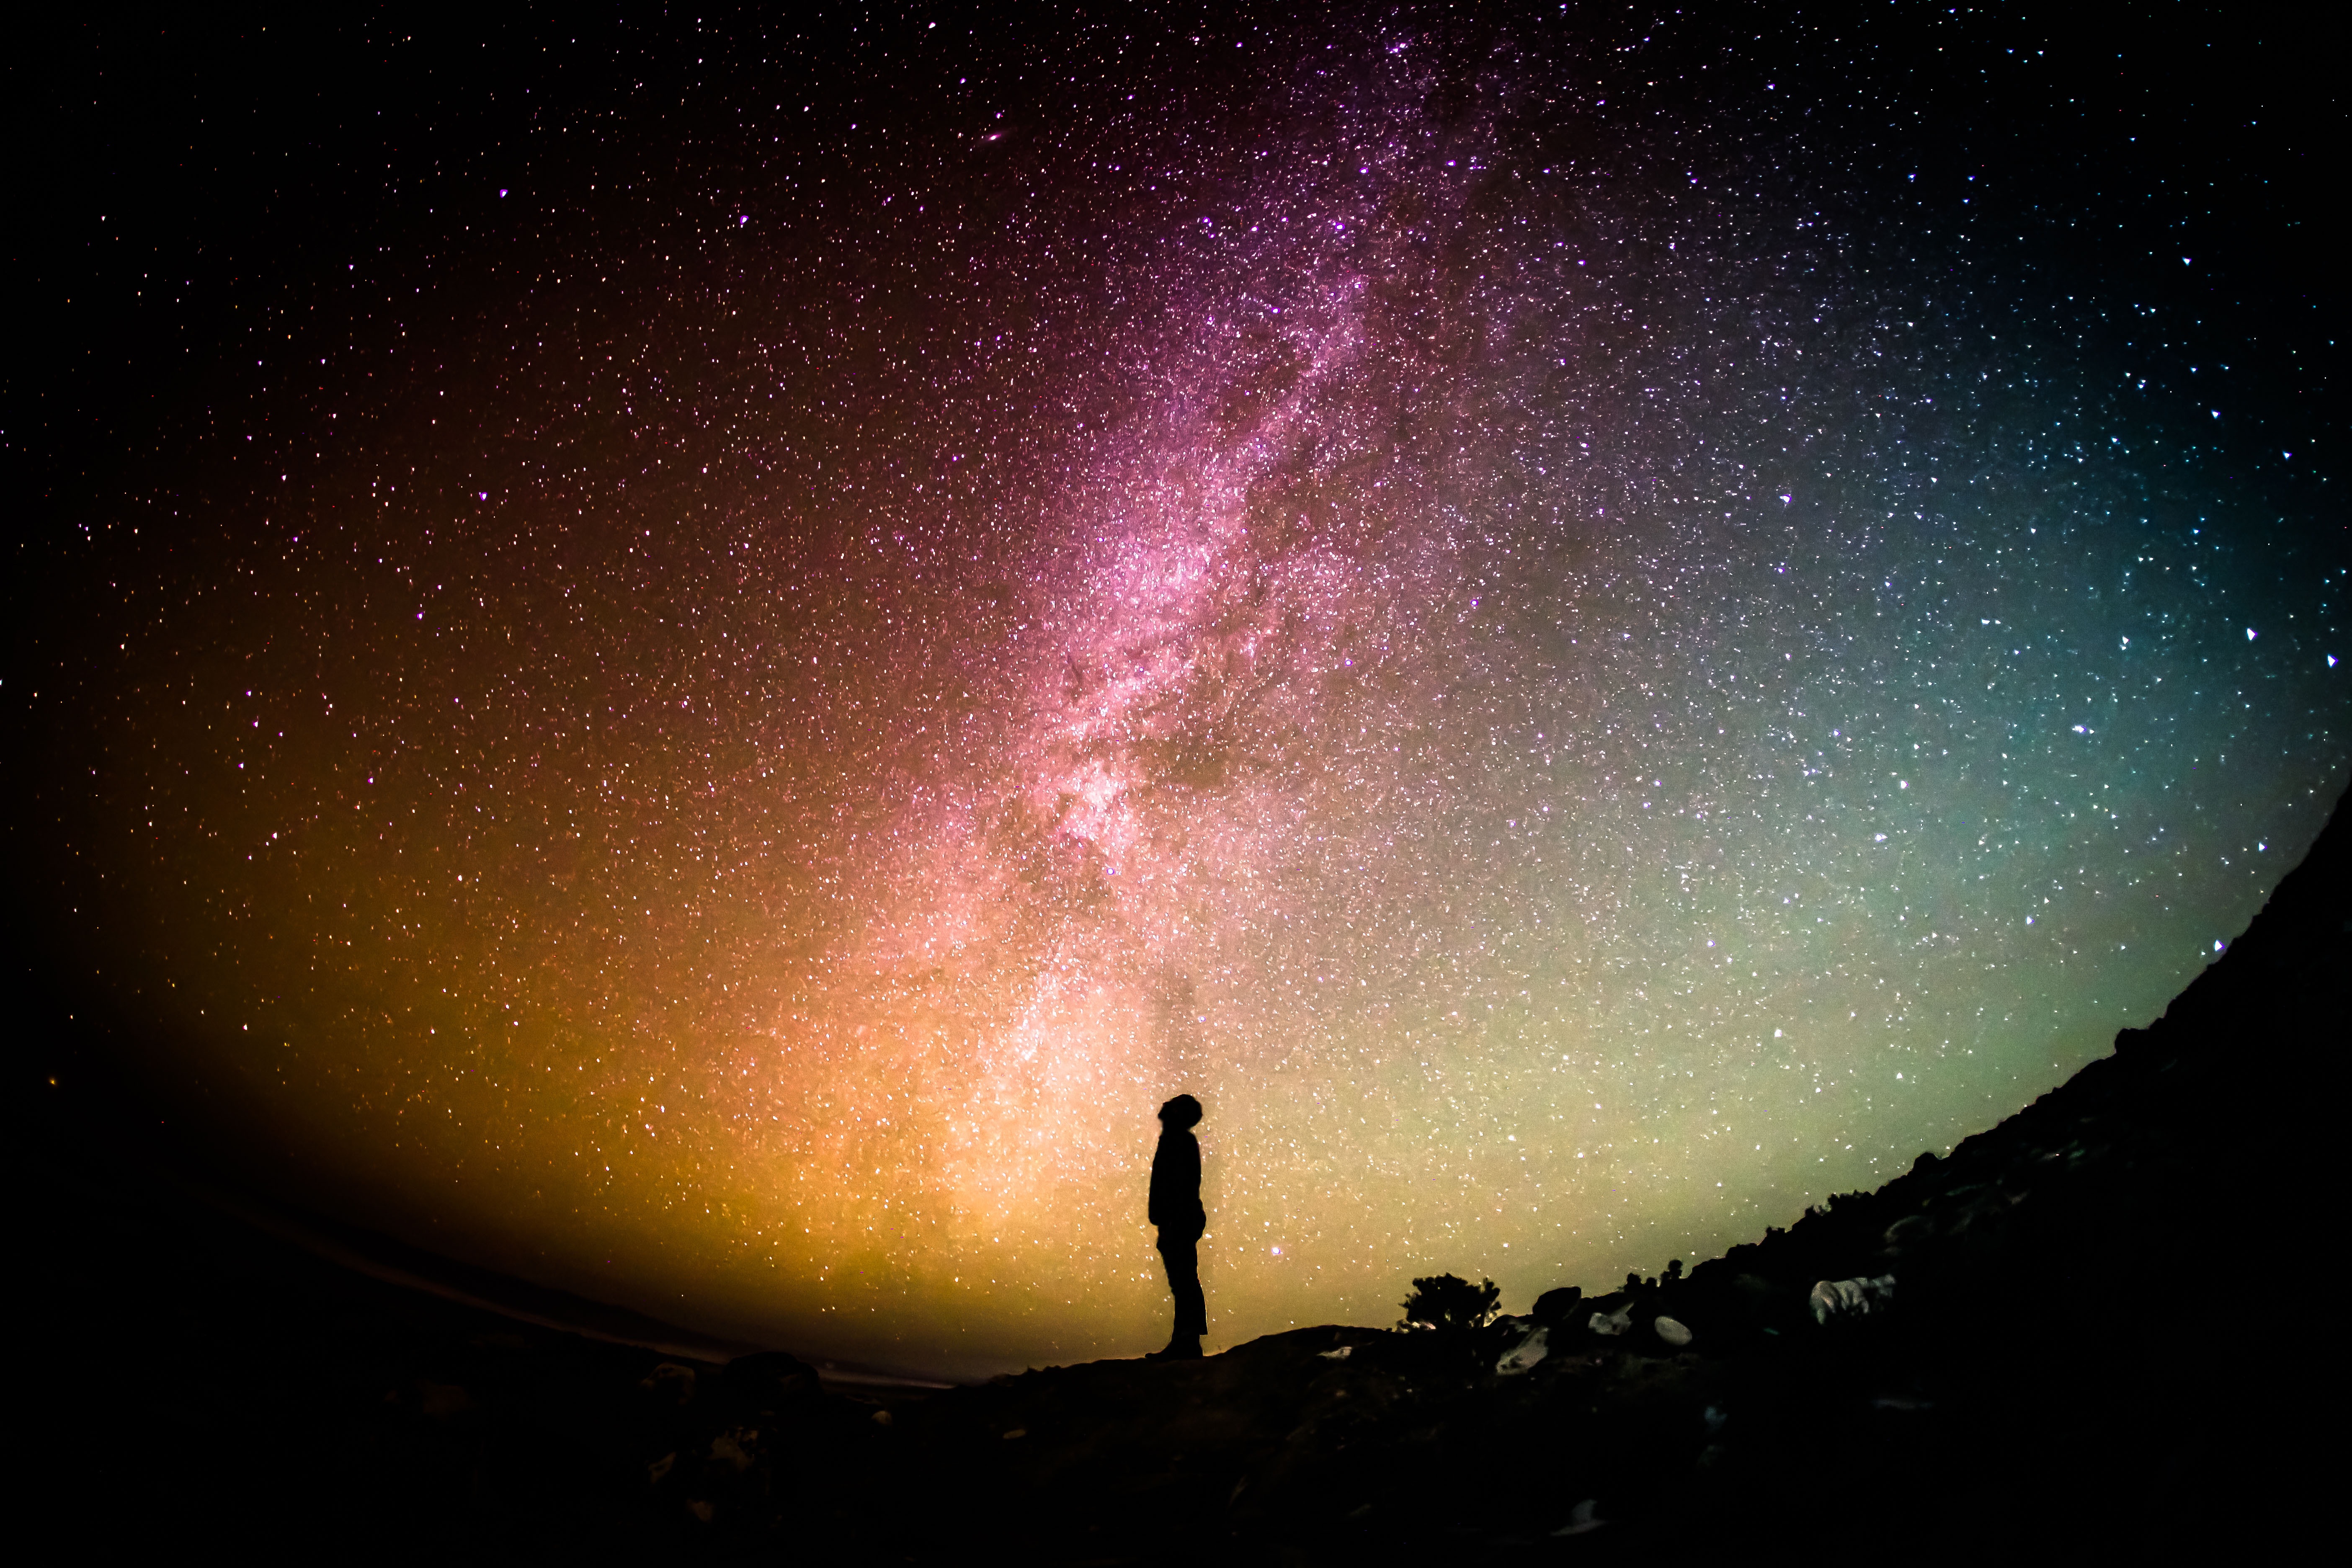 Stock image of a man looking up at a star filled sky